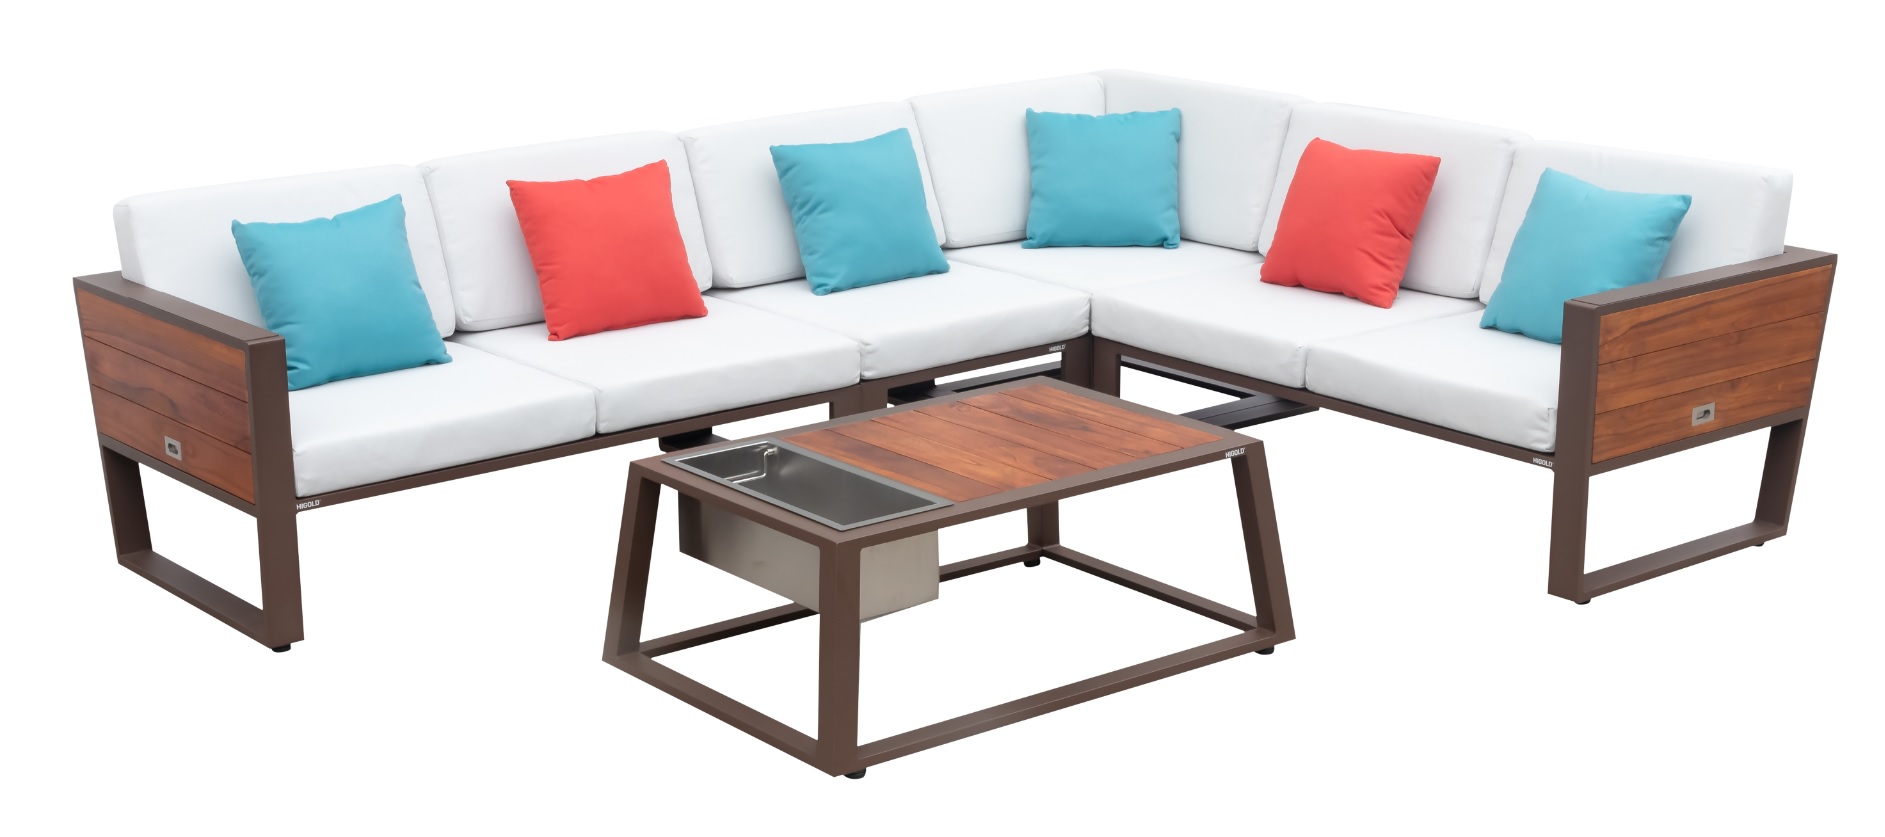 york sectional seating set product image